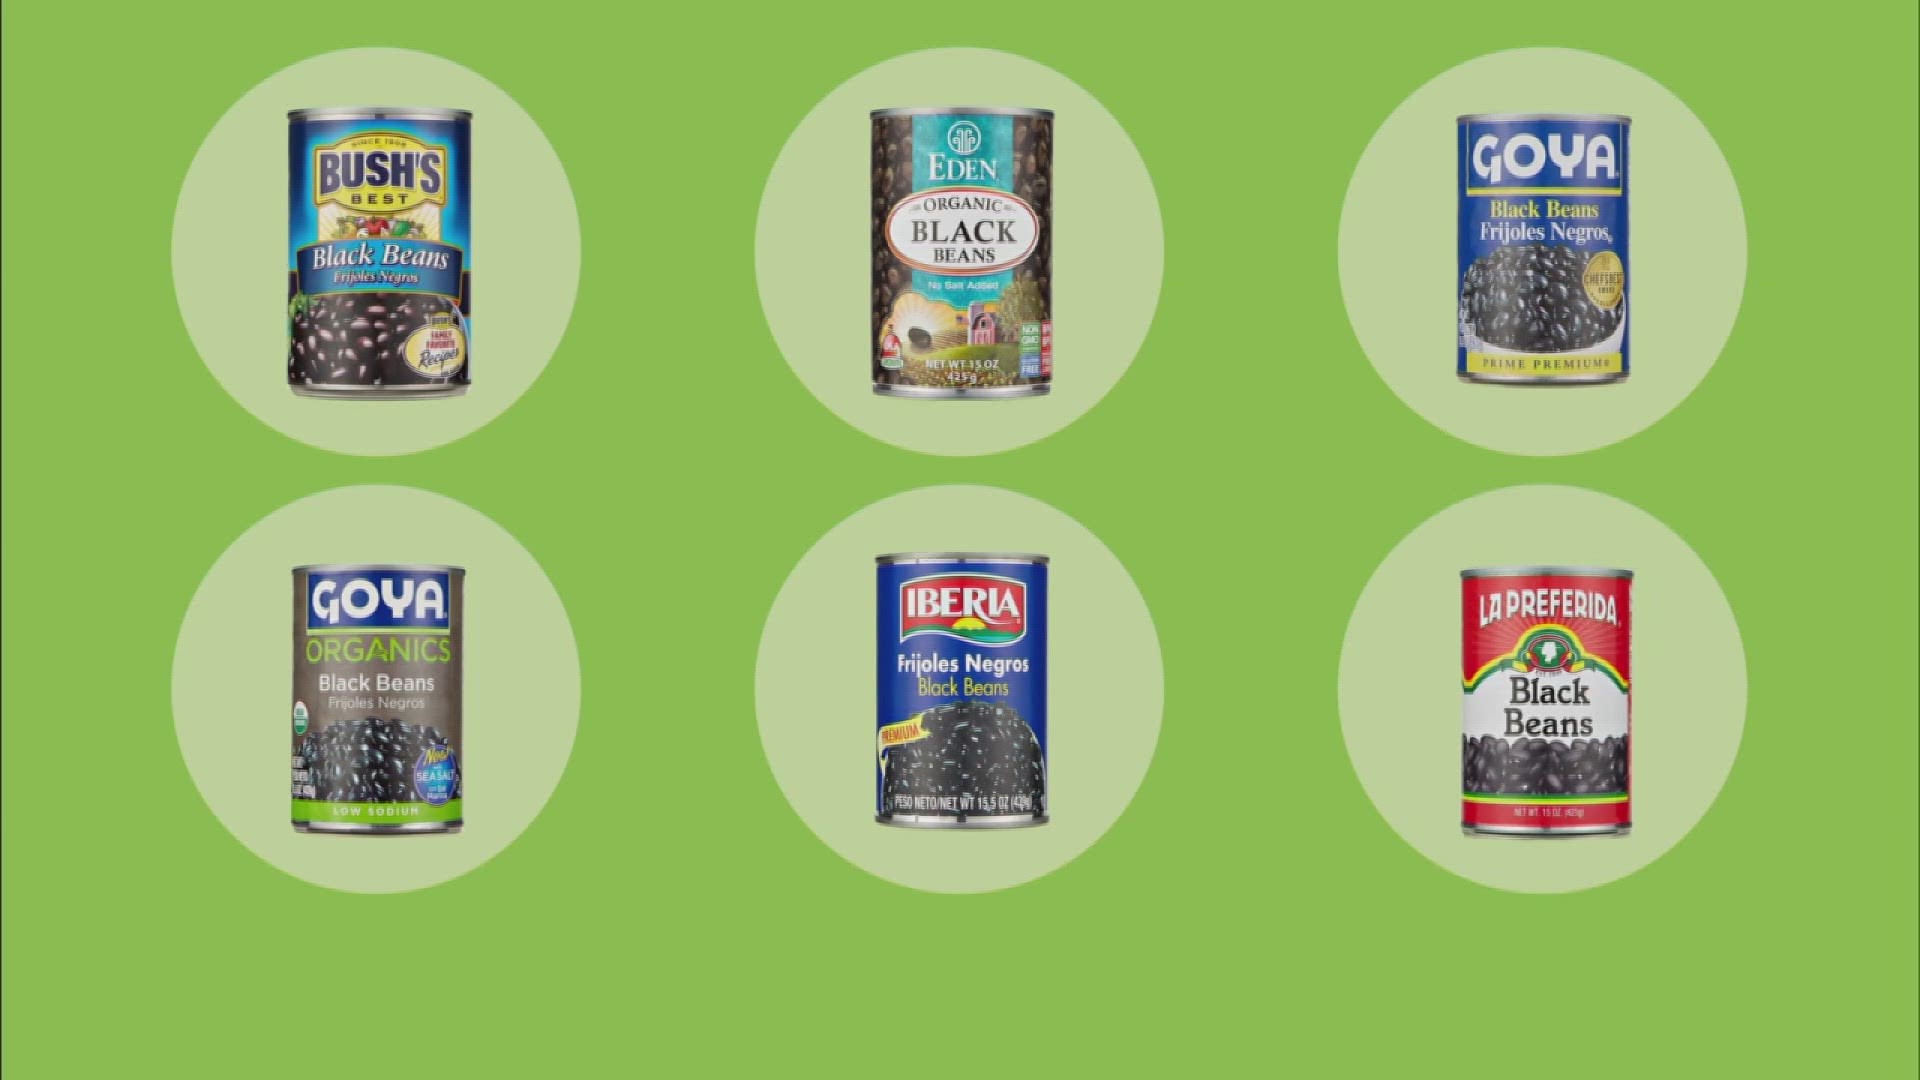 Black beans are a cornerstone in many different cuisines, and canned beans are healthy, cheap and convenient. But which canned bean is best?